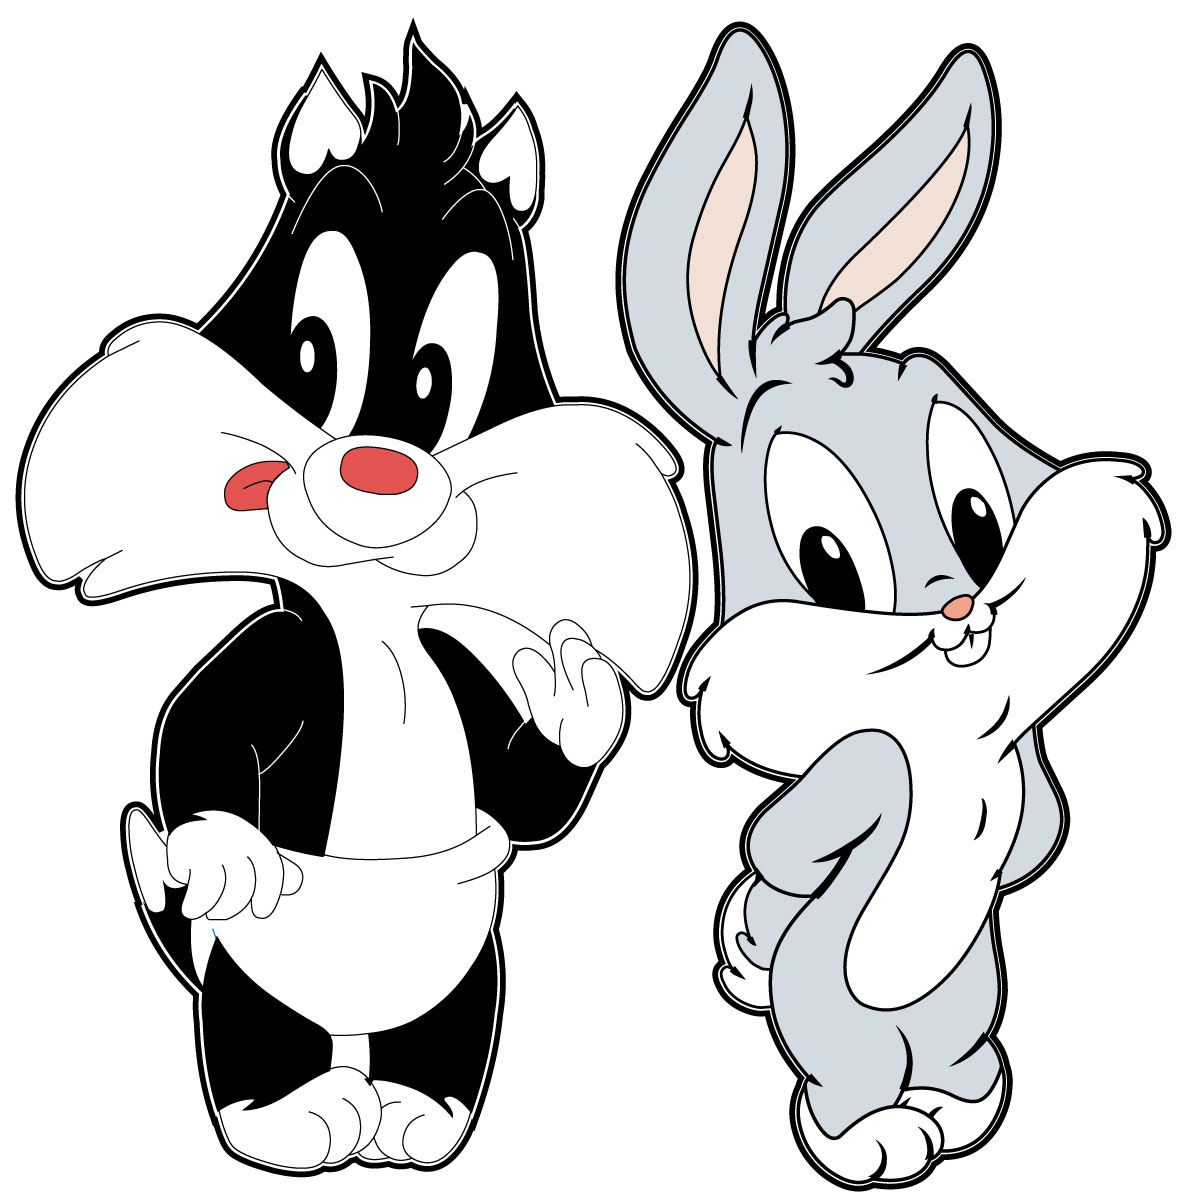 1000+ images about bugs bunny !